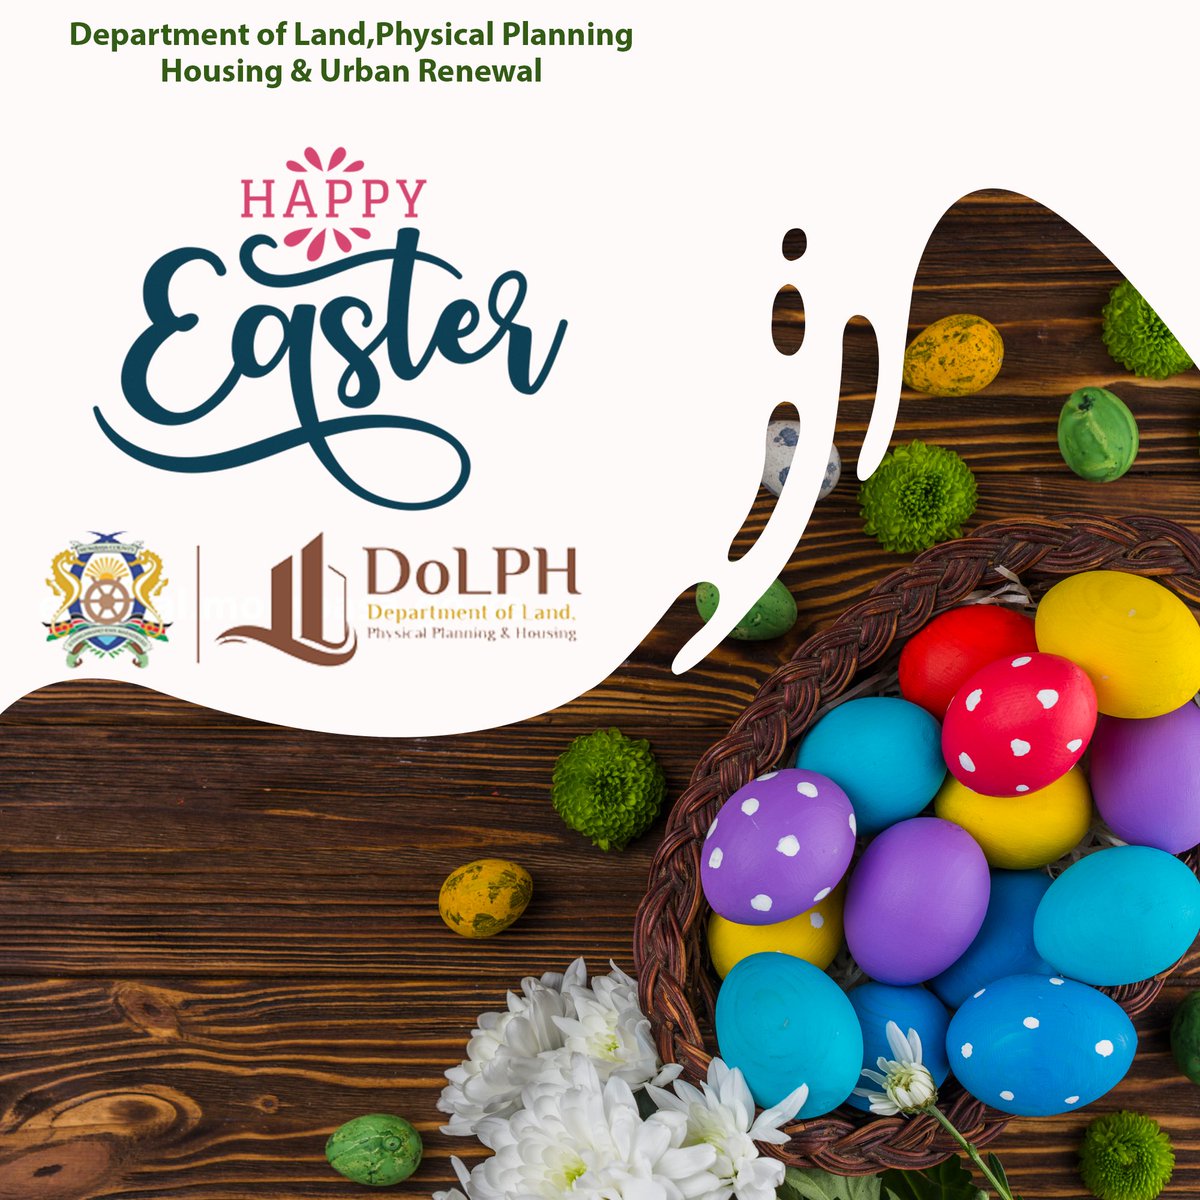 We wish you Happy Easter holidays filled with God's blessings and good health. #HappyEaster2022 #easter2022 #DoLPH #Housing #mombasacounty